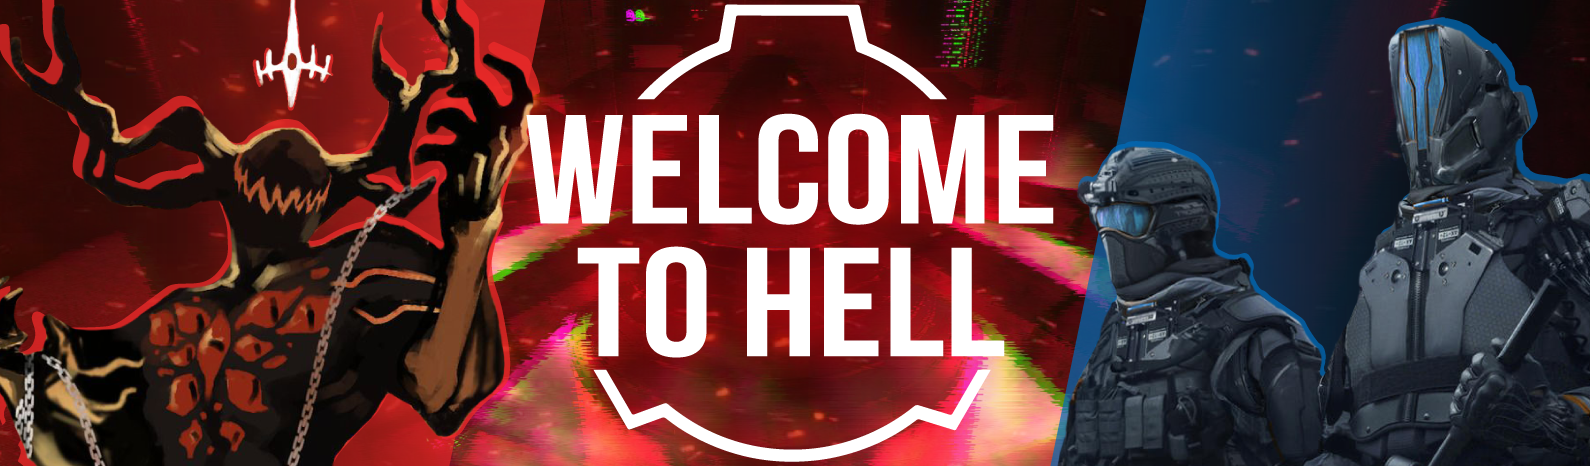 http://scpfoundation.net/local--files/site-7-media-hub/welcome_to_hell_scp_banner.png